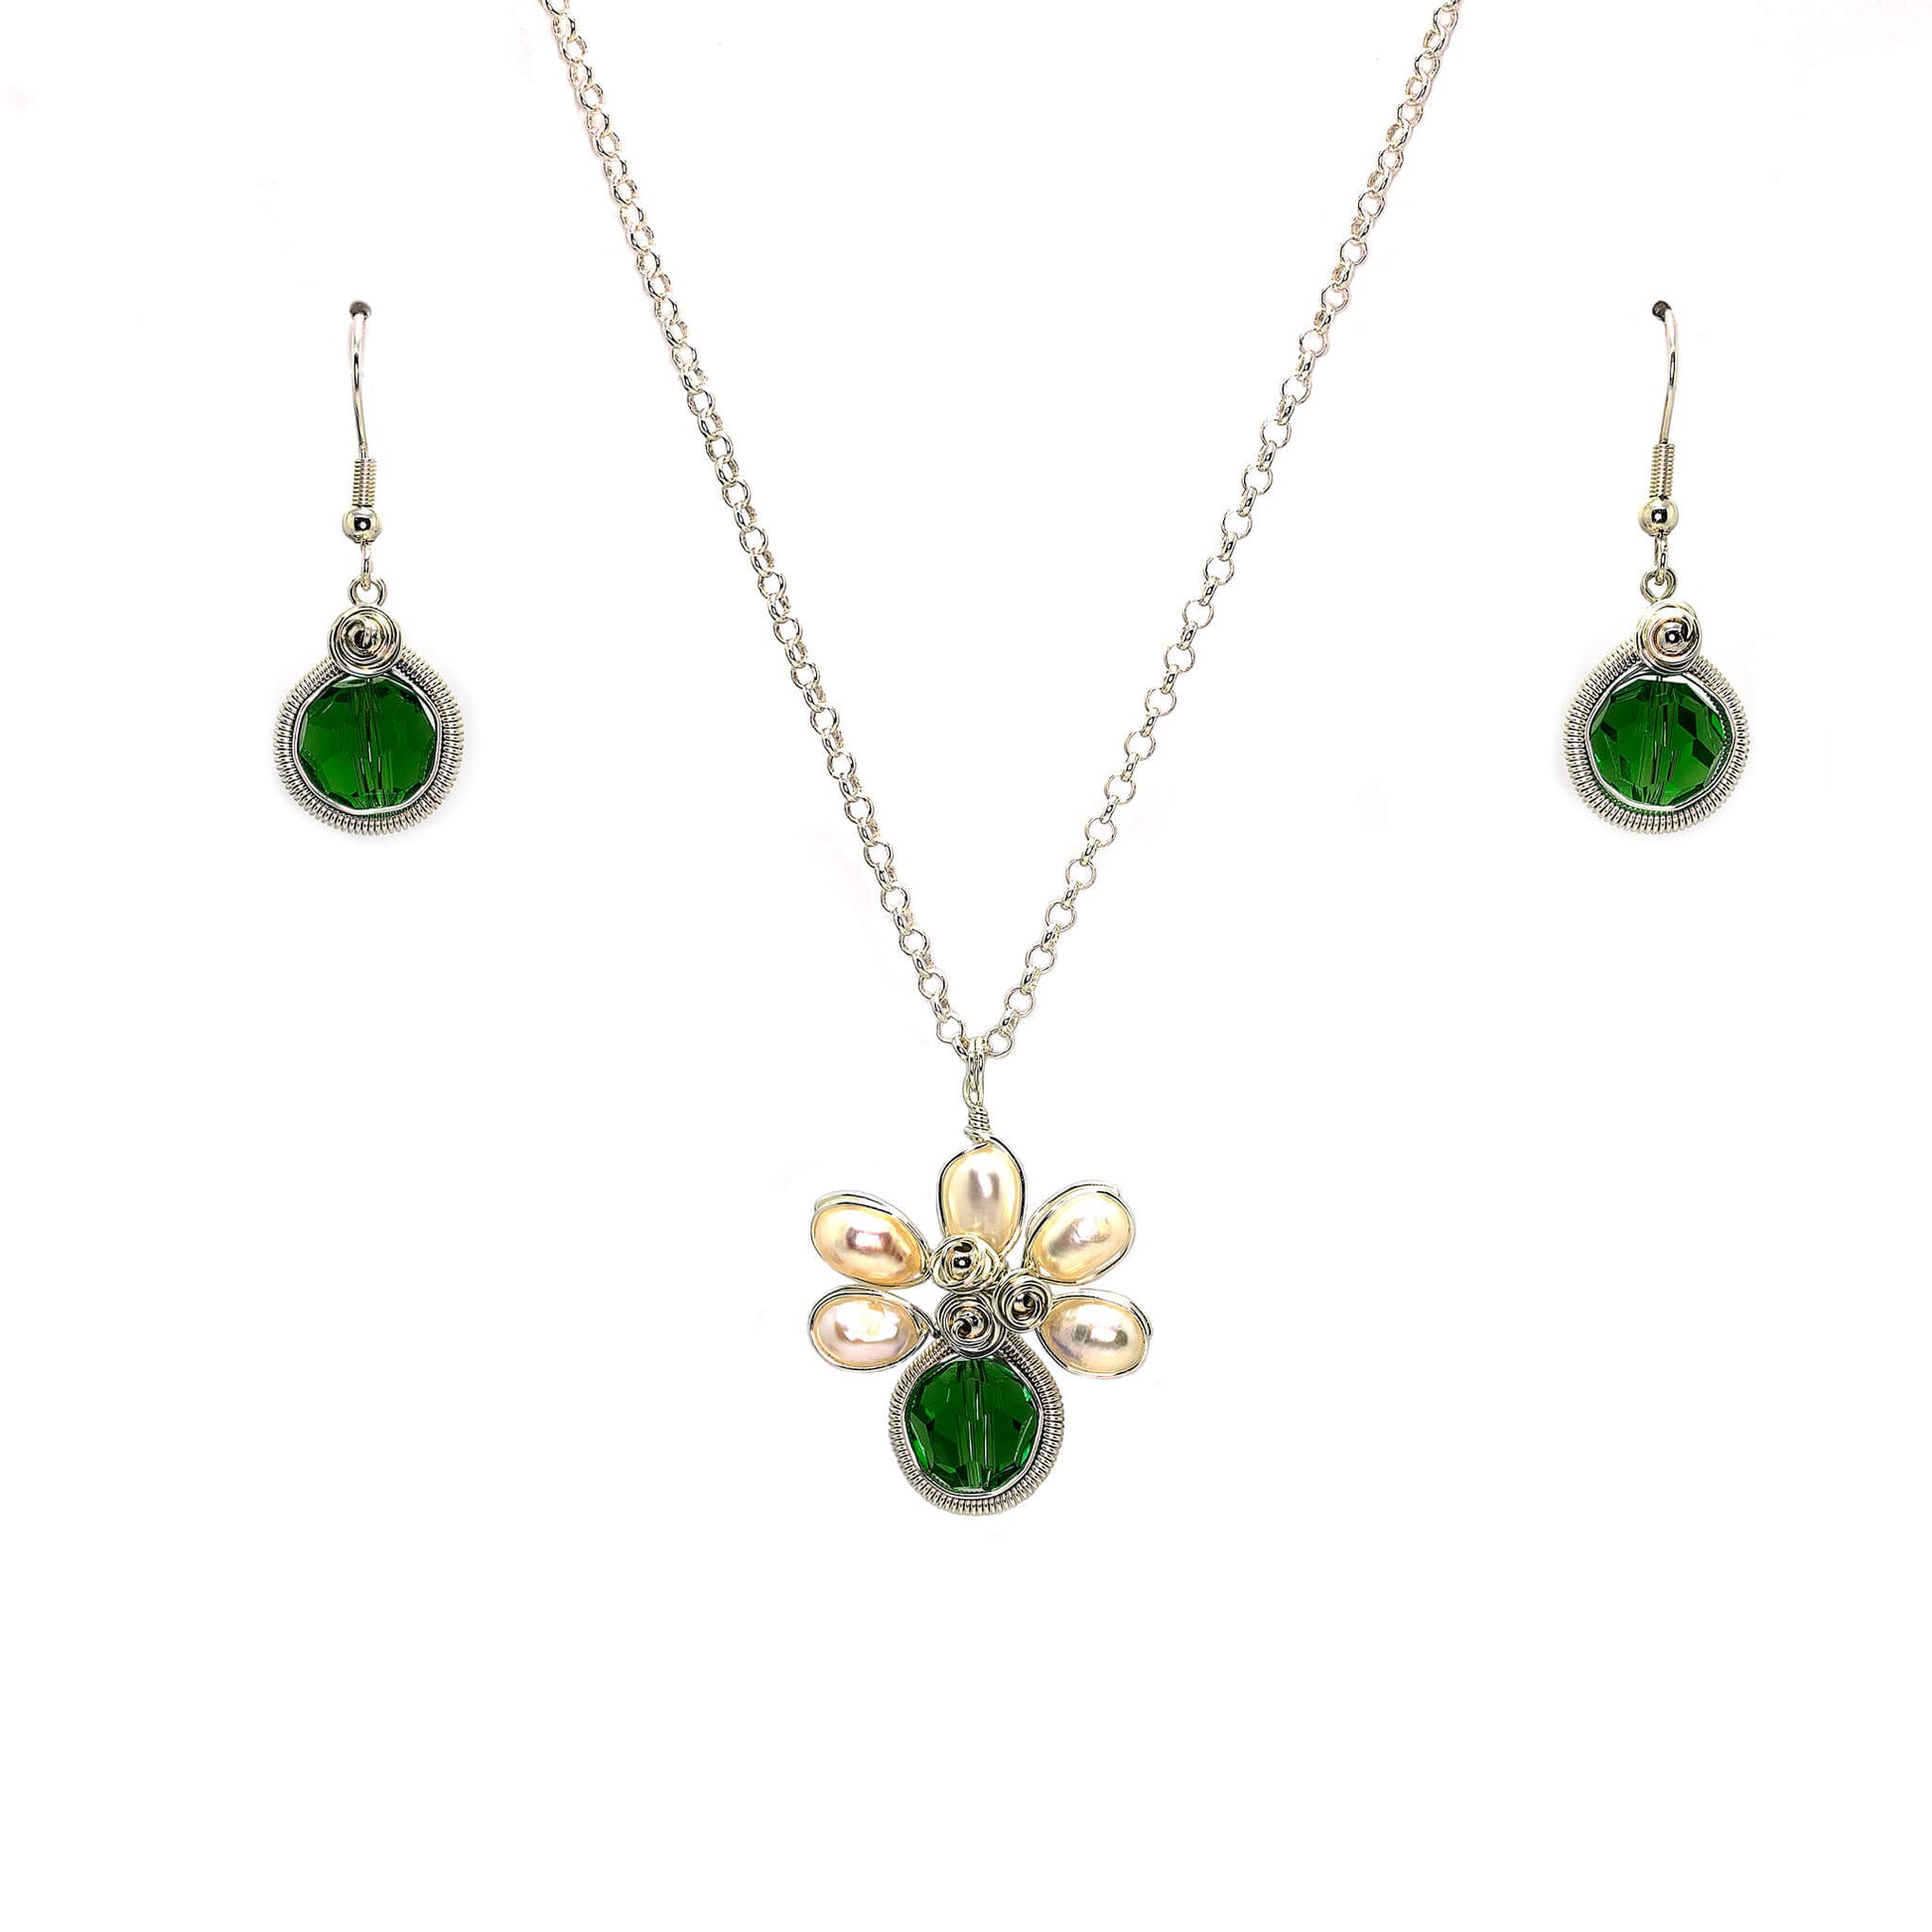 May Birthstone Crystal Necklace.-Earrings Set. Dark Green Crystals, Fresh Water Pearls  and Silver Set. 9.25 Sterling Silver Chain. 